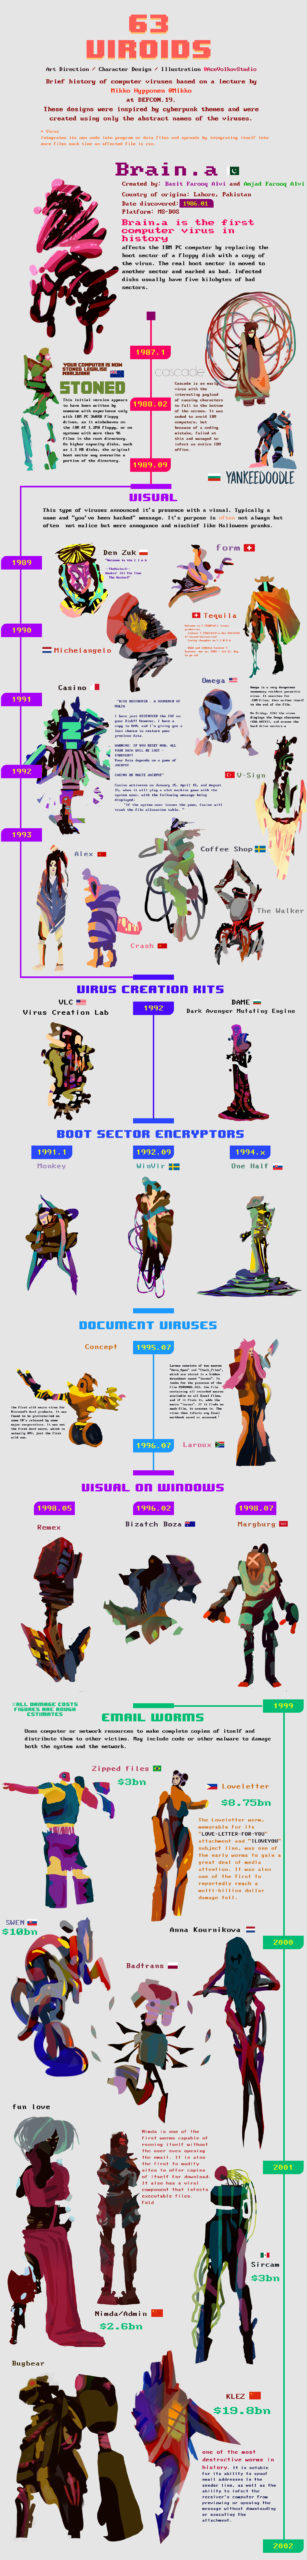 The World’s Most Infamous Computer Viruses, Transformed Into Cyberpunk Heroes